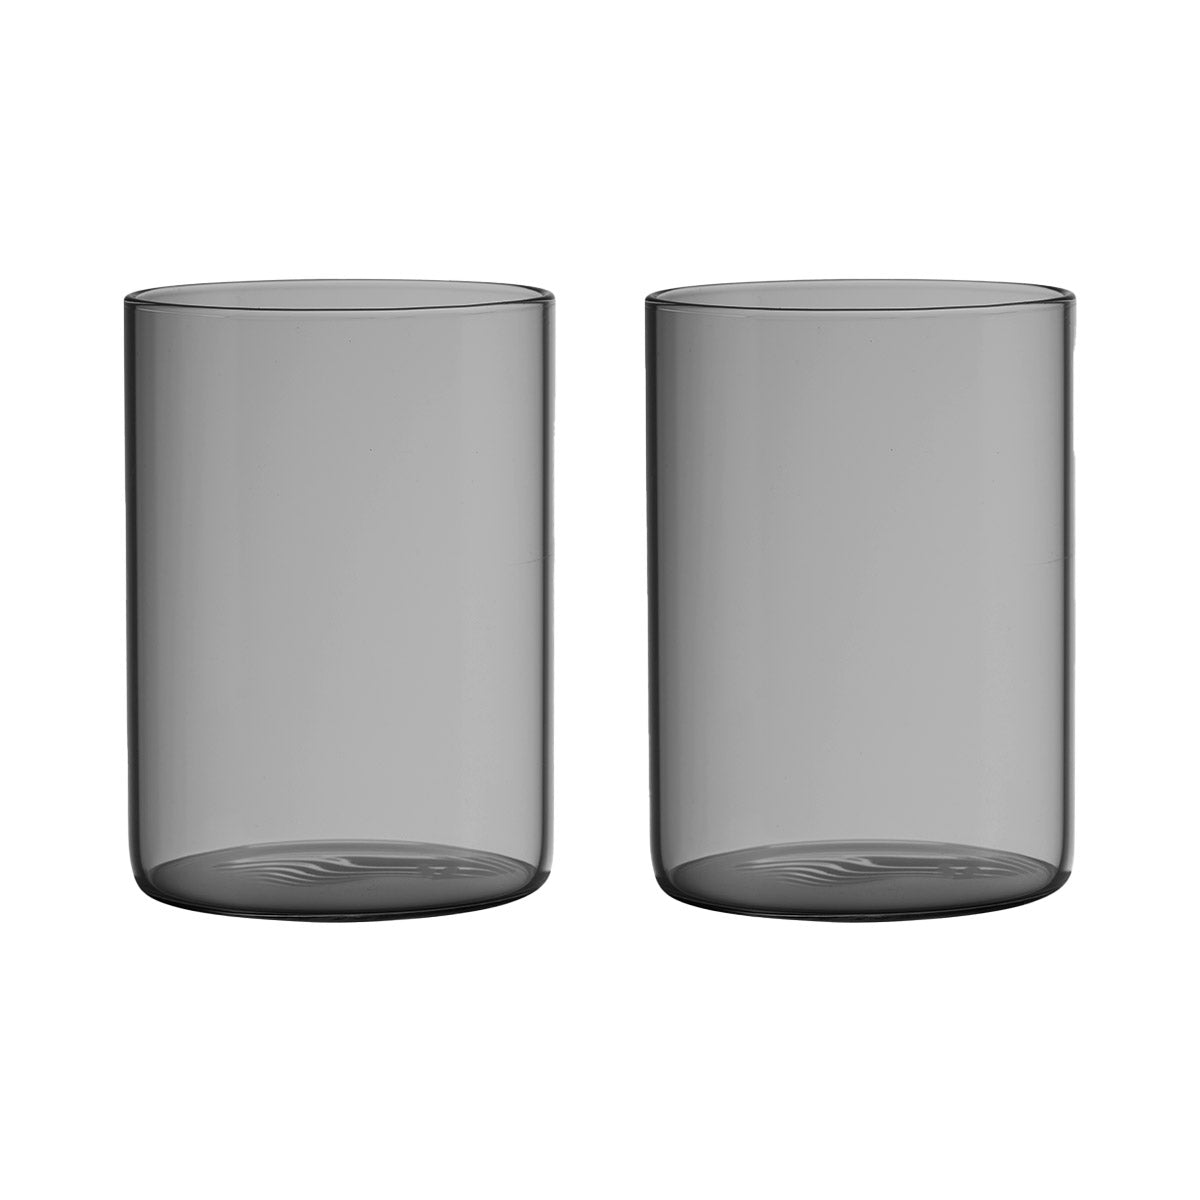 Favourite drinking glass - The Mute Collection - Set of 2 pcs